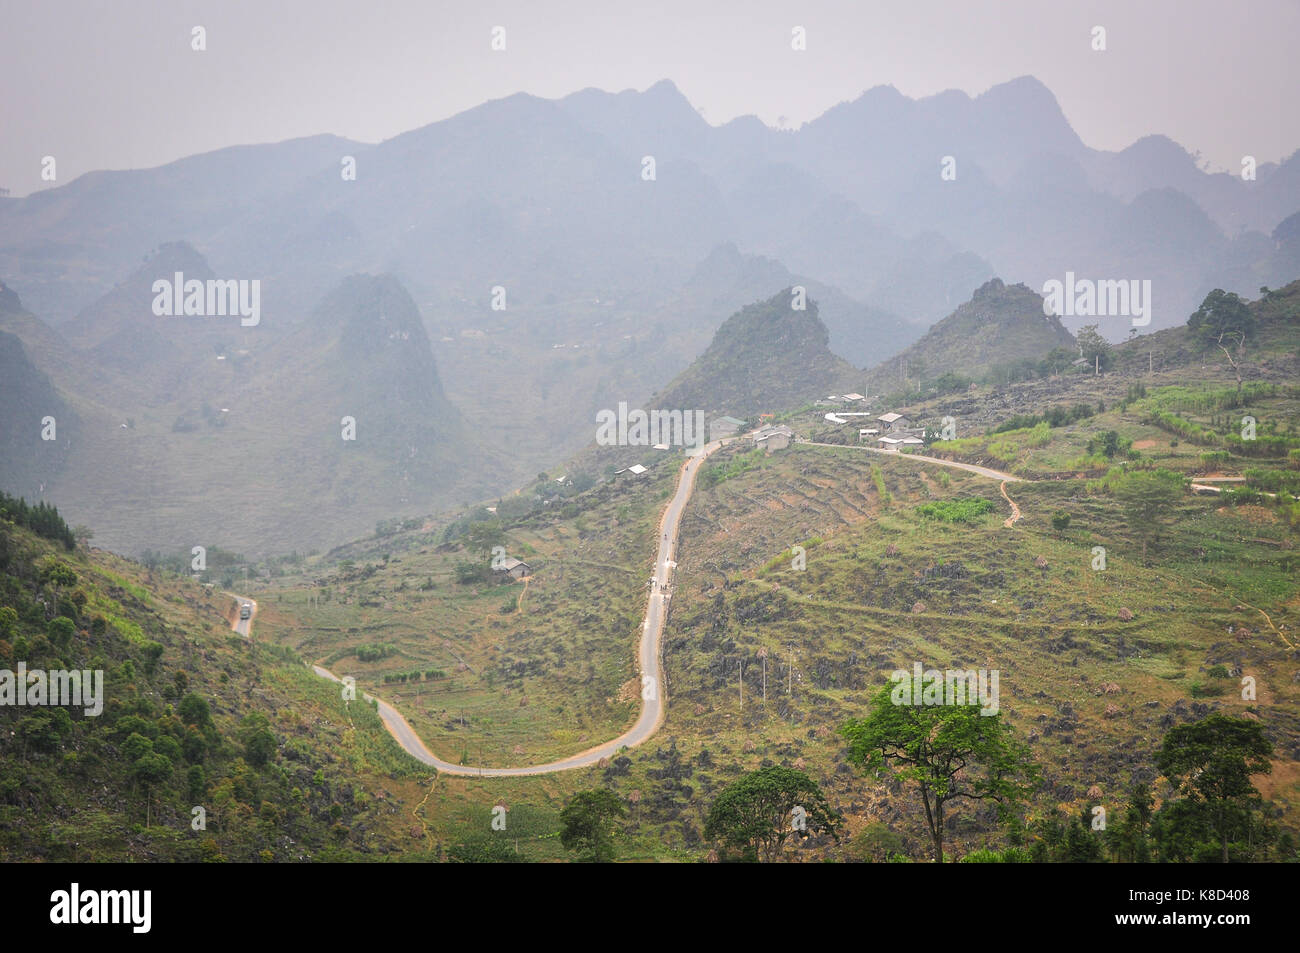 Mountain road in Ha Giang province, Vietnam. Ha Giang has many cultural festivals due to the presence of more than 20 ethnic minority groups. Stock Photo